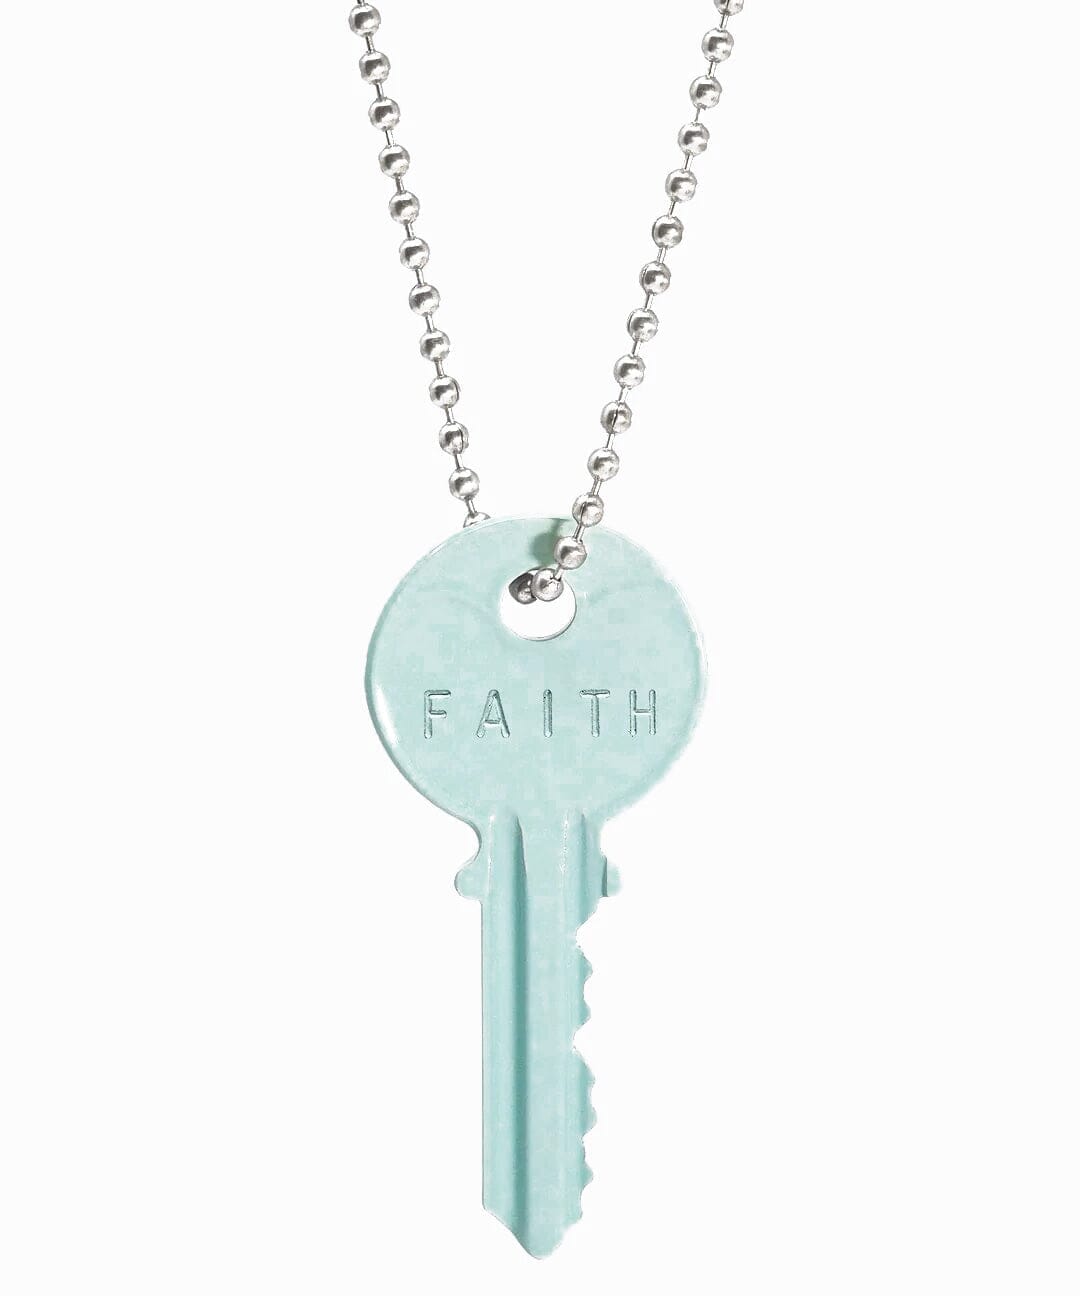 N - Pastel Green Classic Ball Chain Key Necklace Necklaces The Giving Keys 